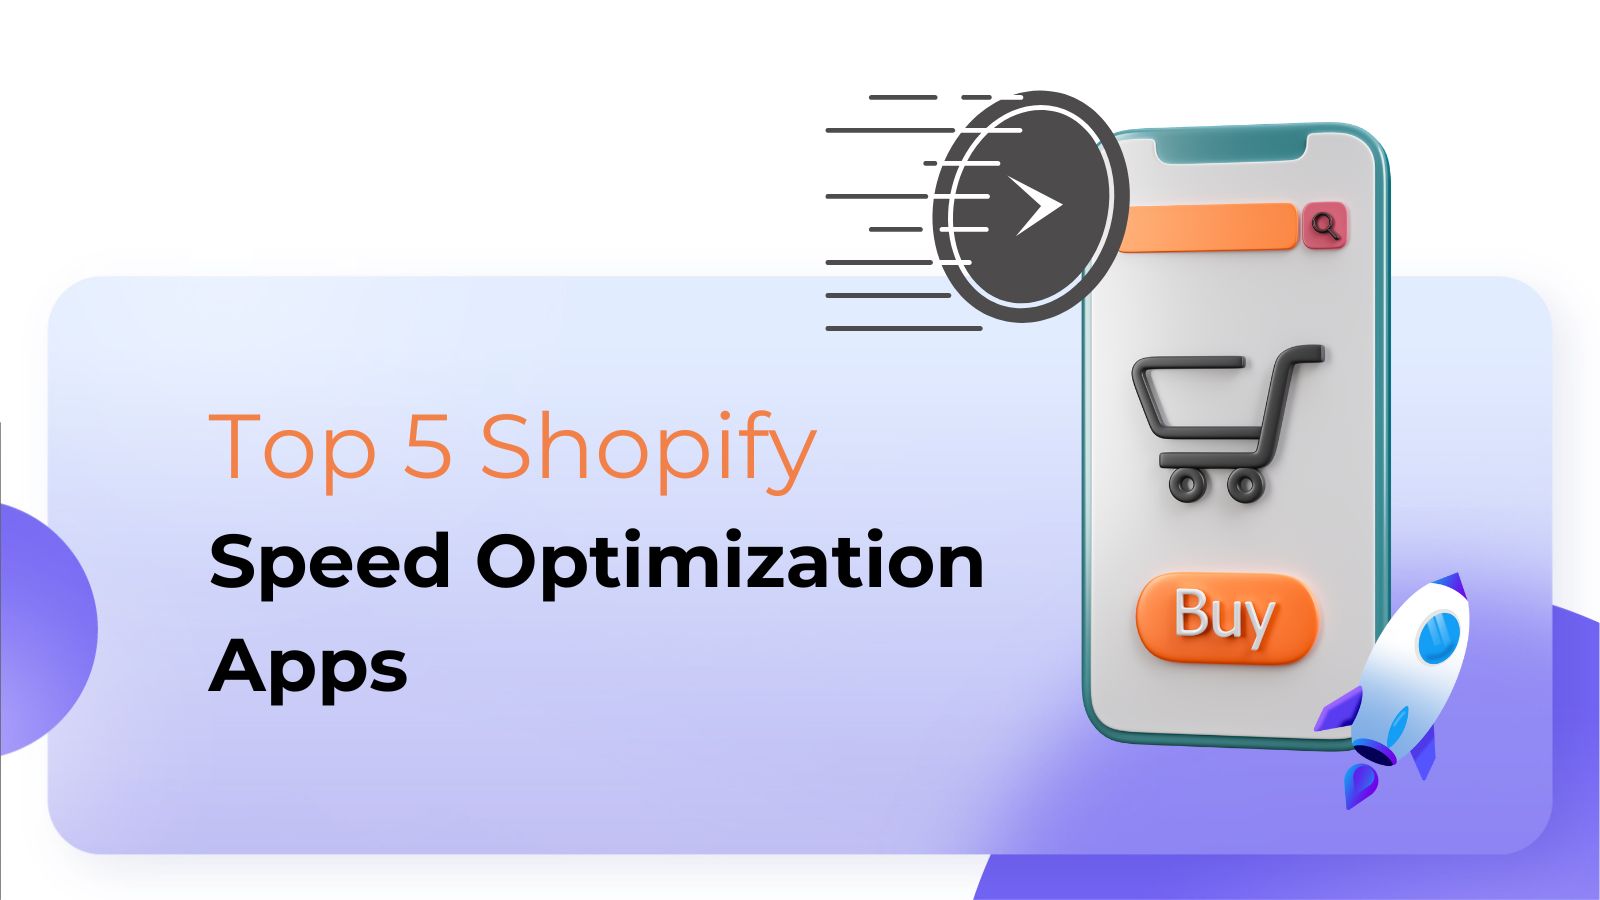 The Golden List of Top Shopify Speed Optimization Apps